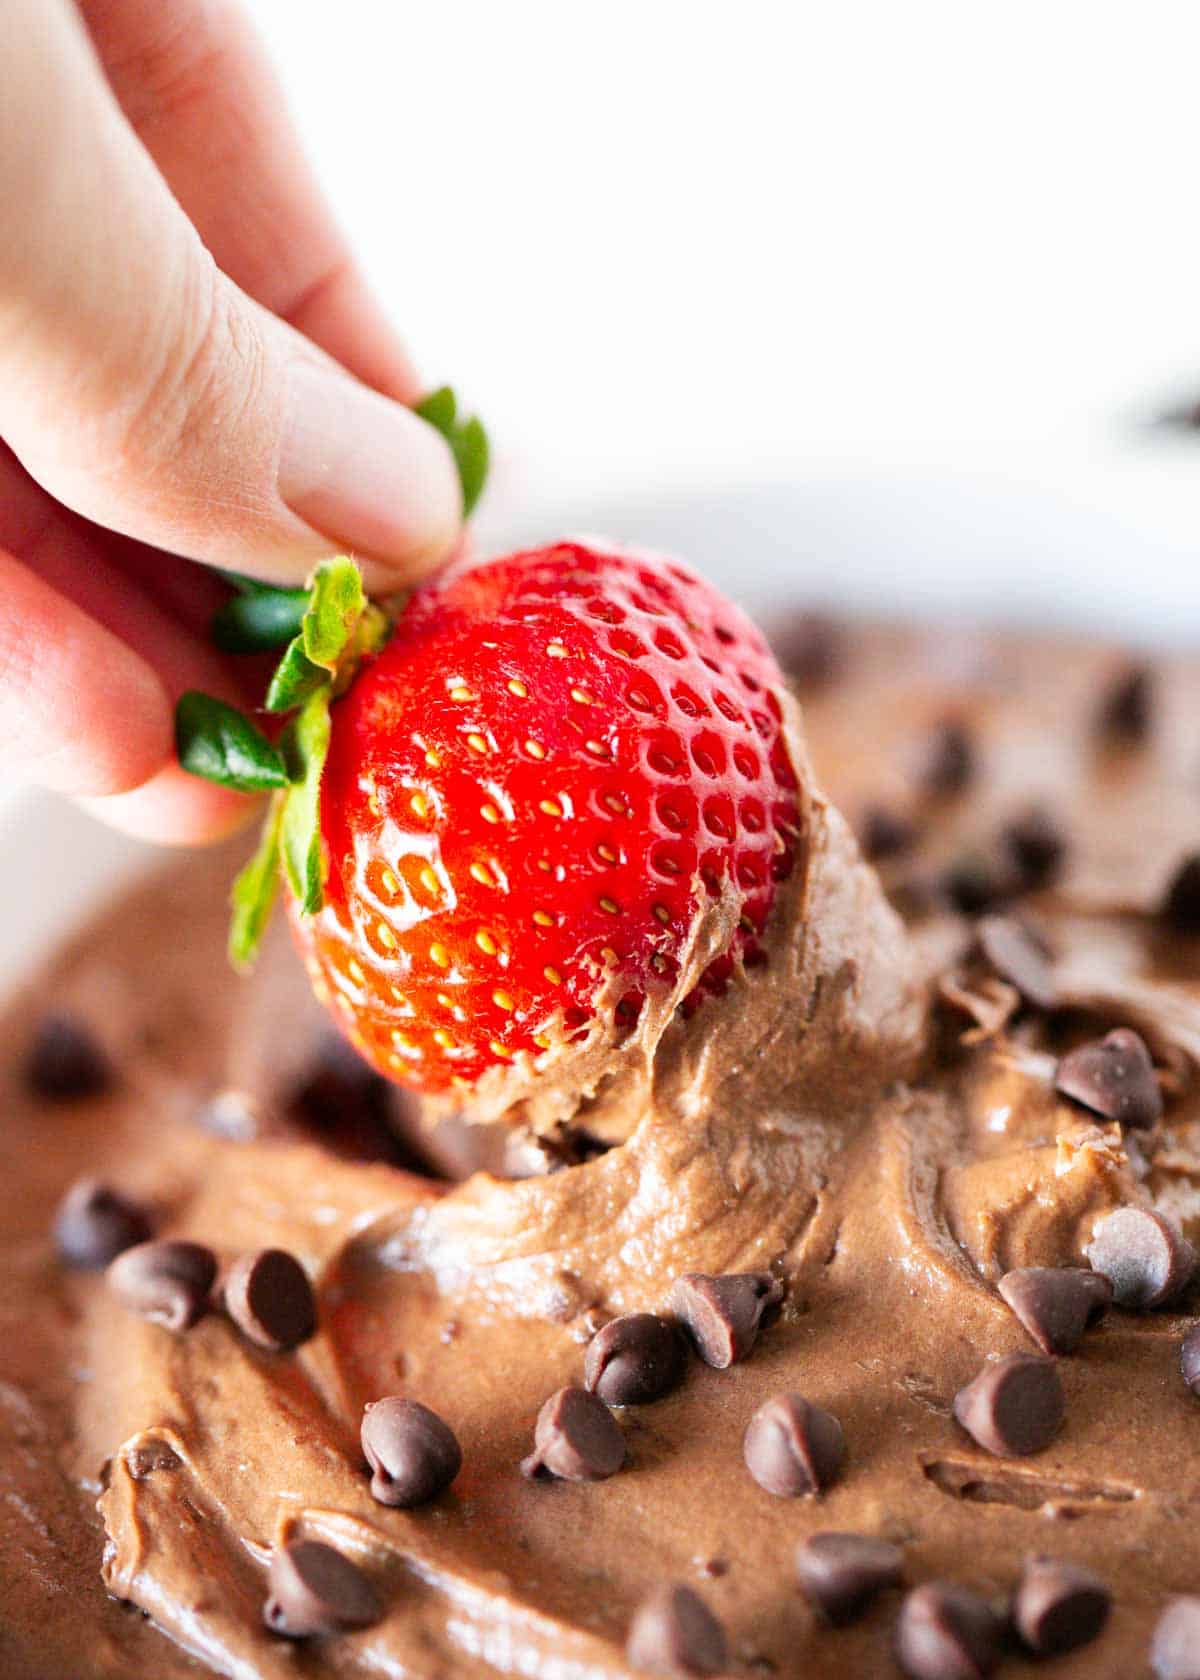 Dipping strawberry into brownie batter dip.